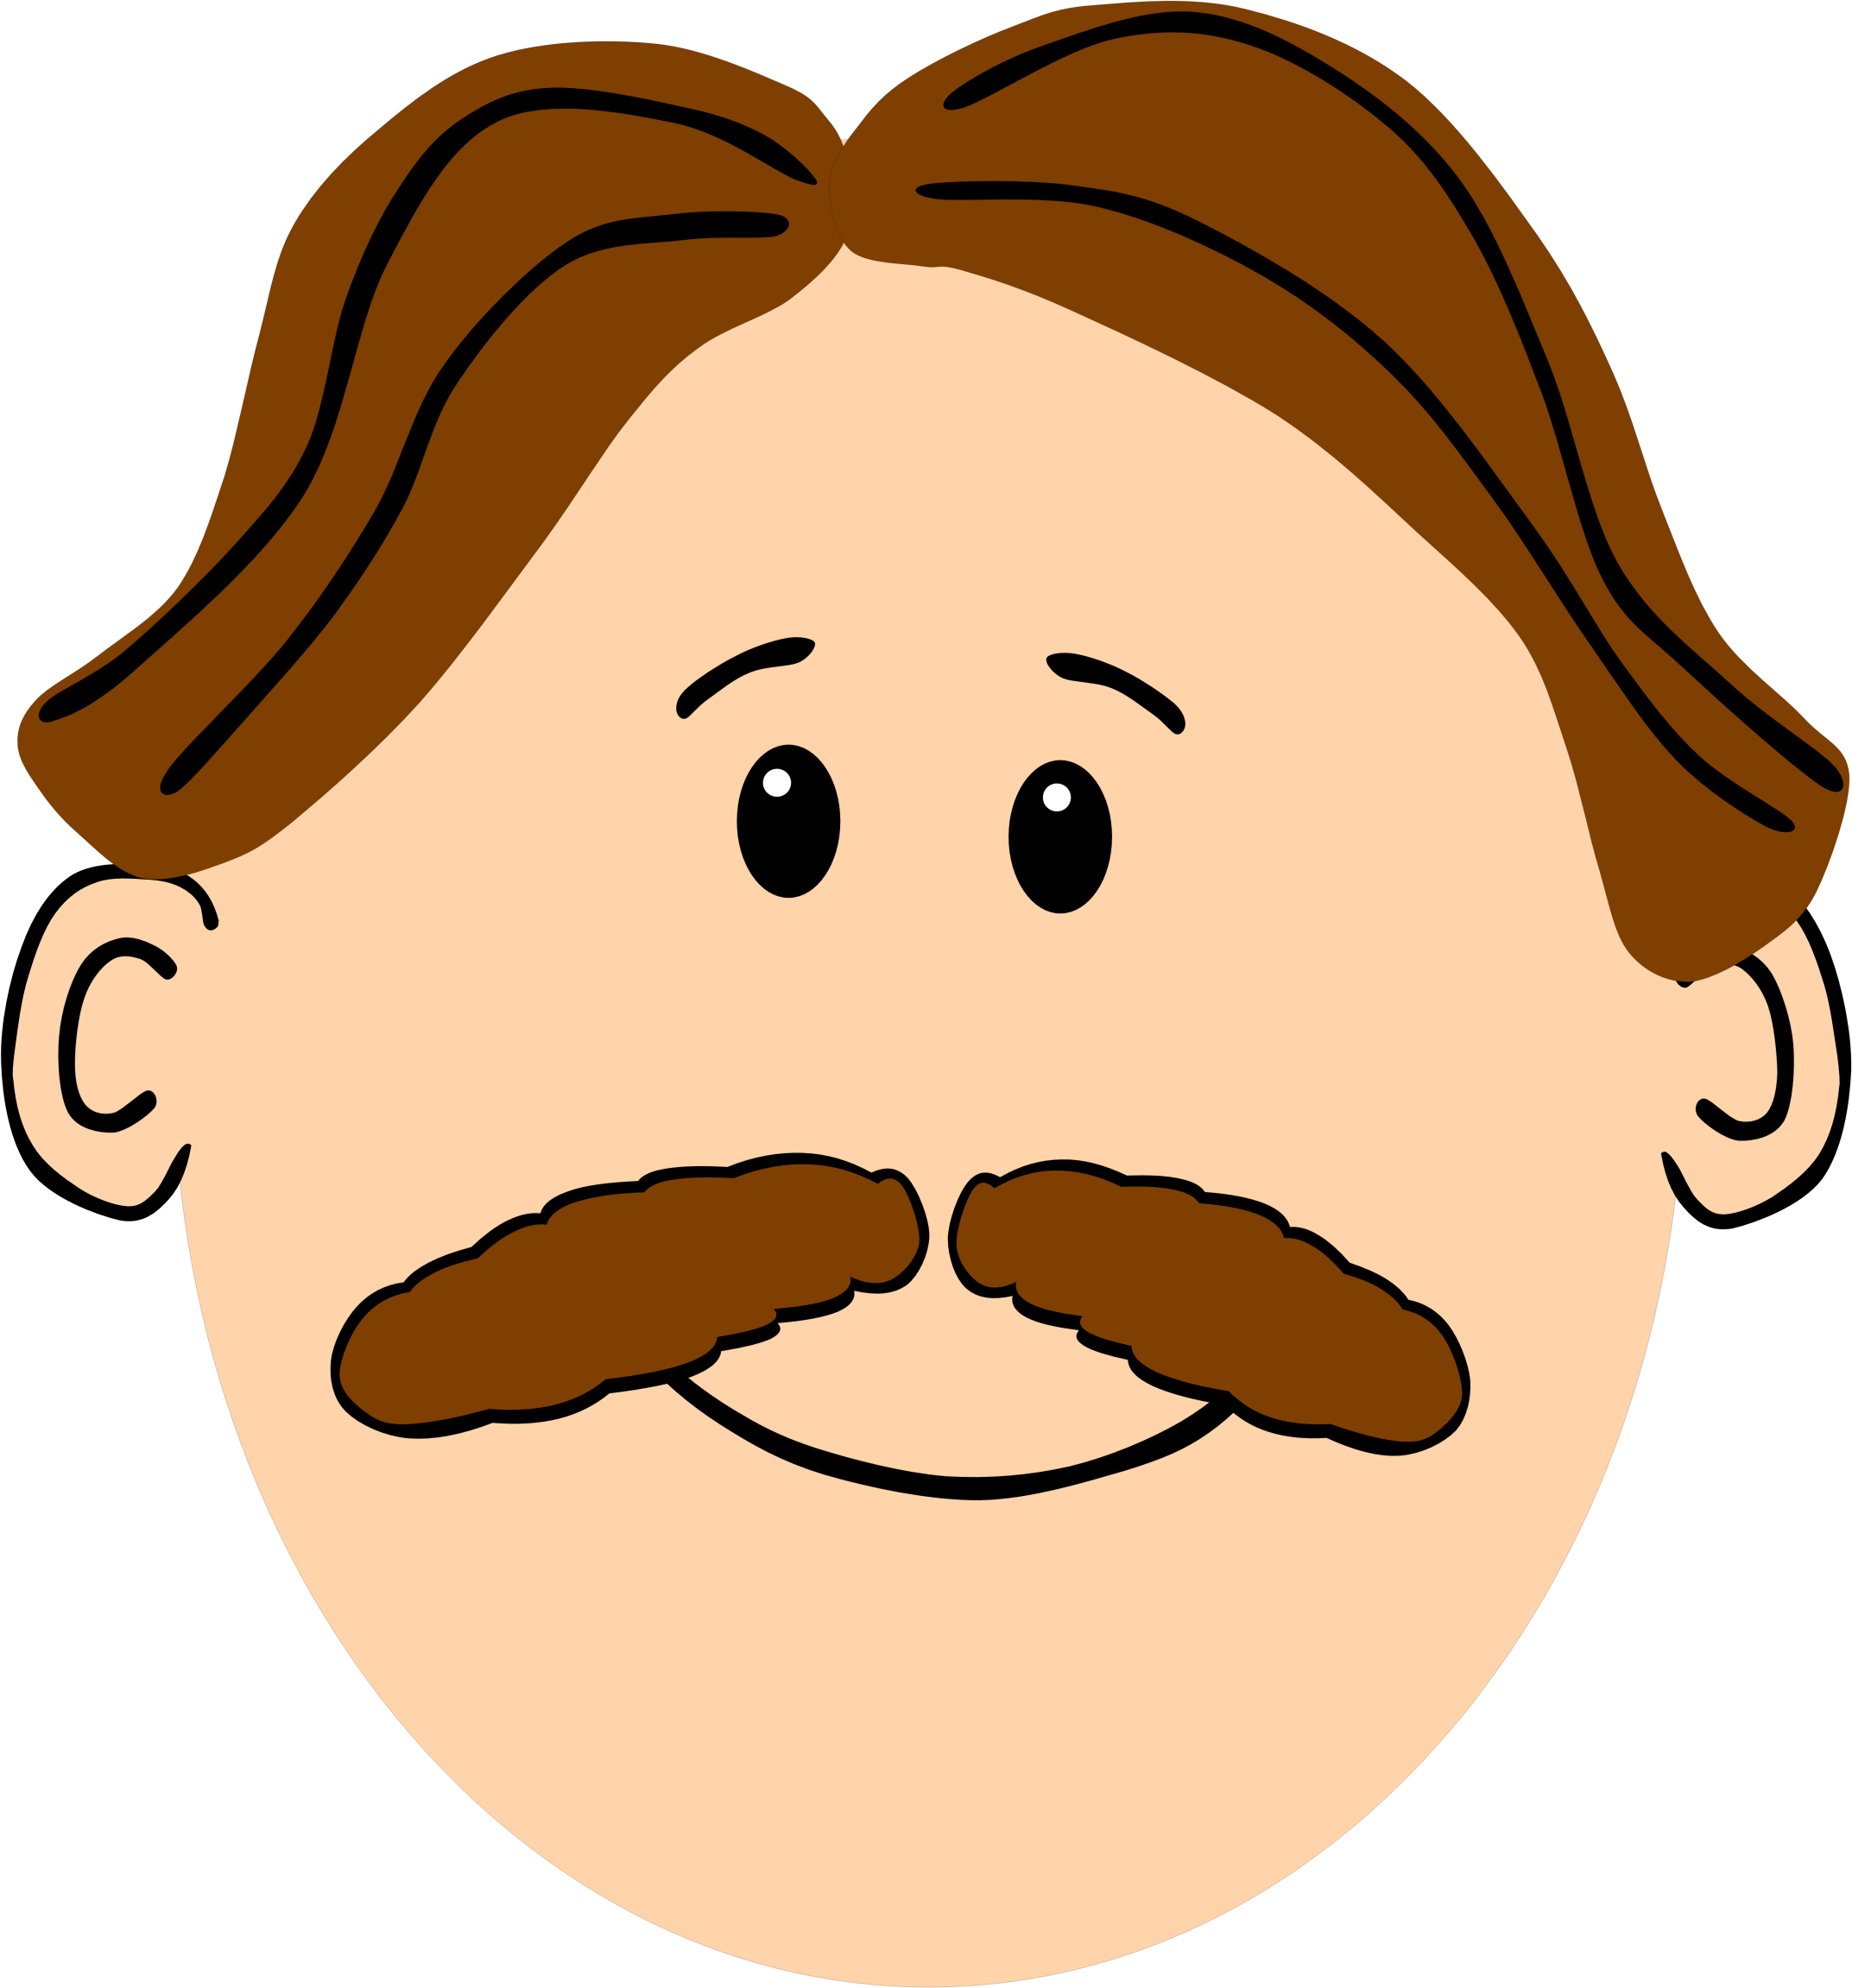 With Brown Hair And Mustache - Cartoon Man With Moustache (2145x2303)